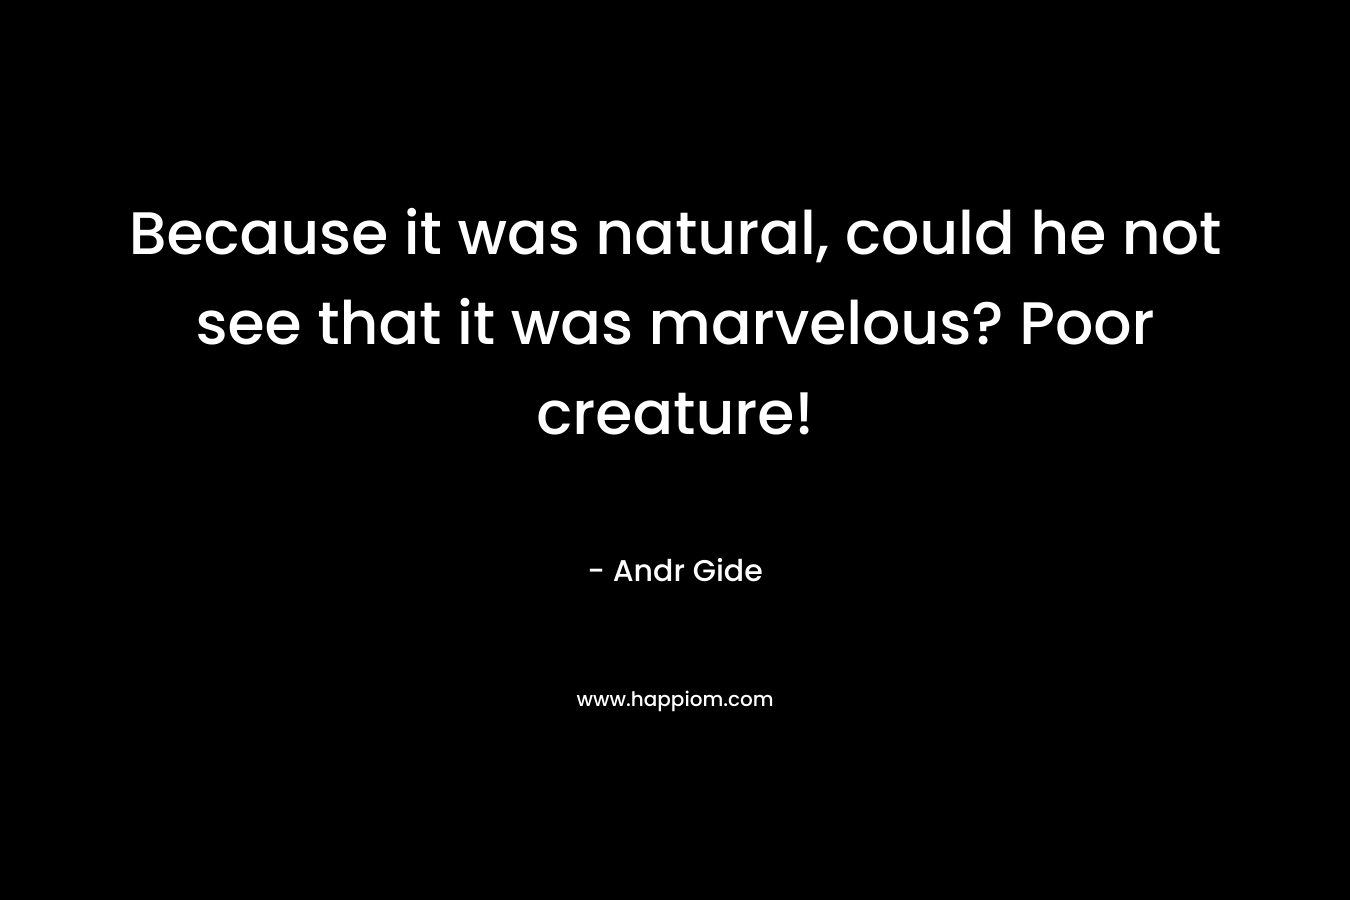 Because it was natural, could he not see that it was marvelous? Poor creature! – Andr Gide